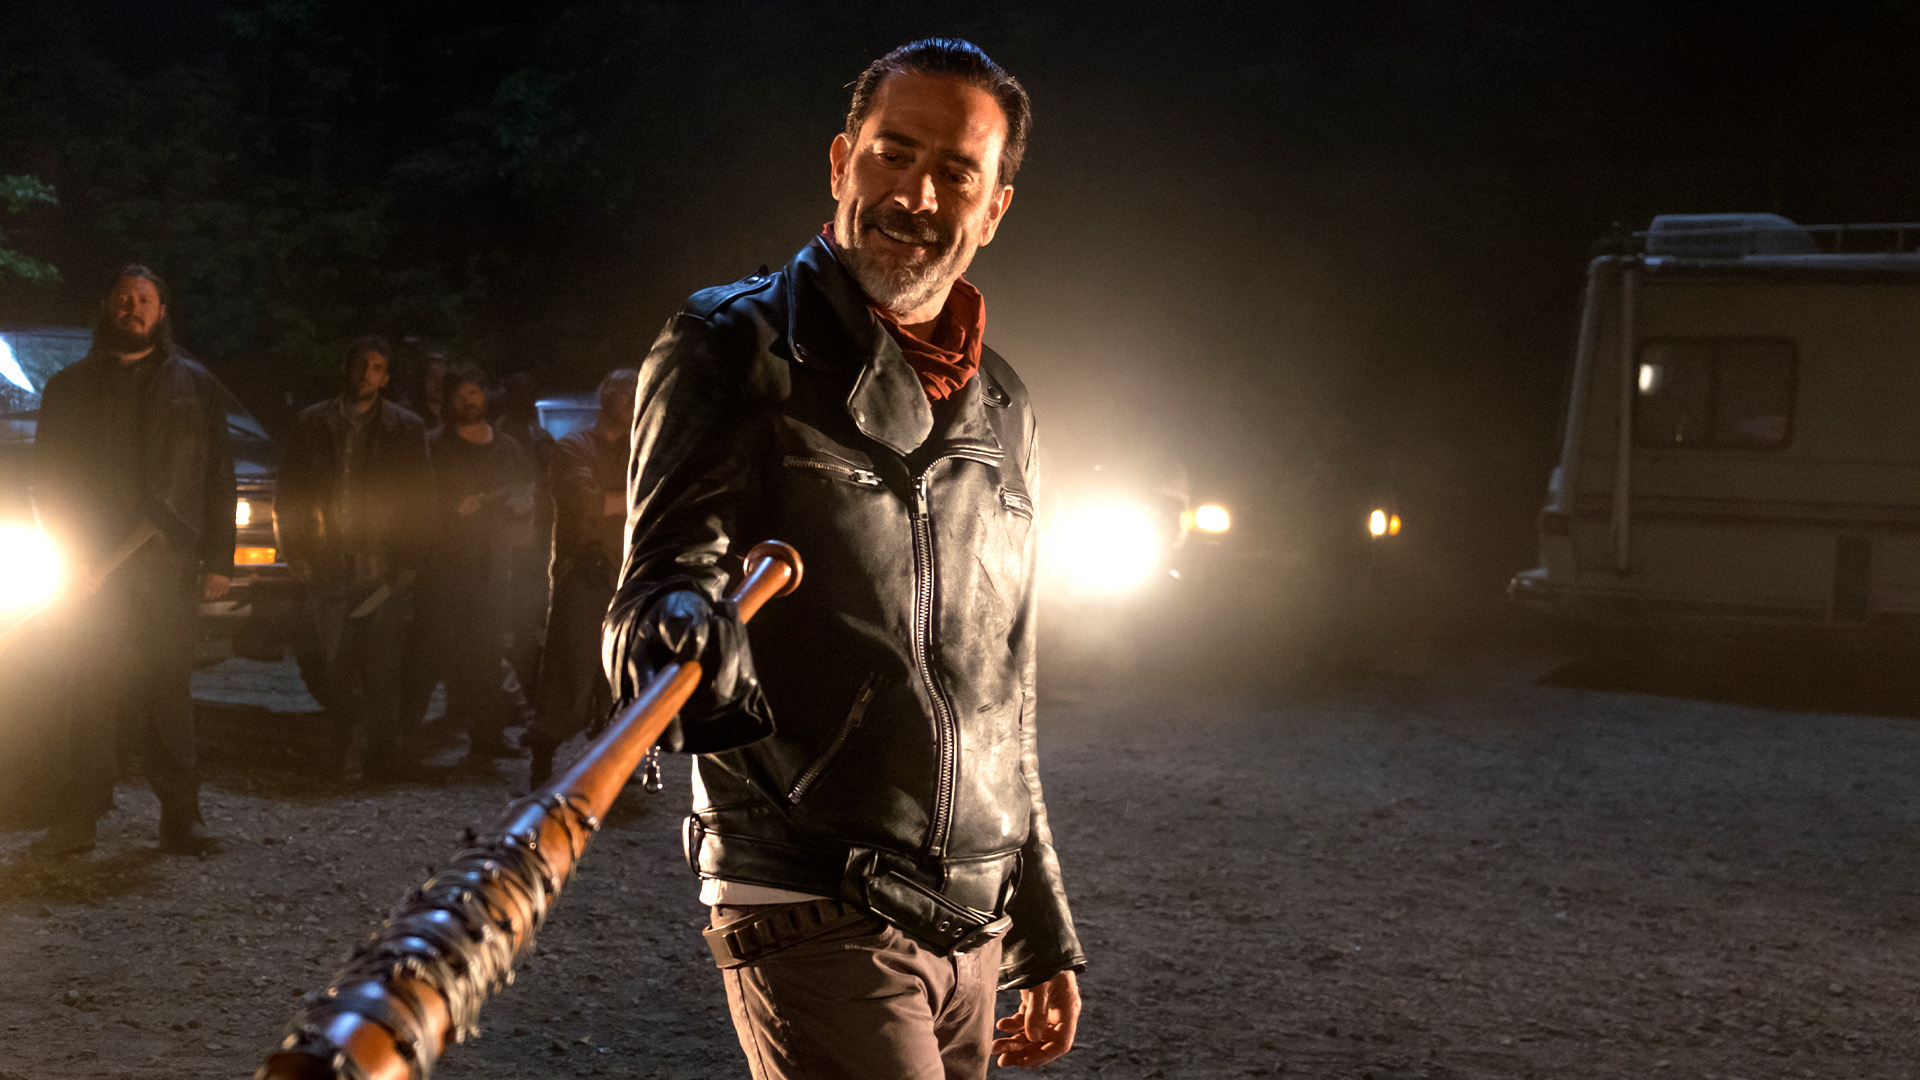 The Walking Dead: Best of Negan Season 1 Episode 6 - The Day Will Come When You Won't Be: Best of Negan Addition